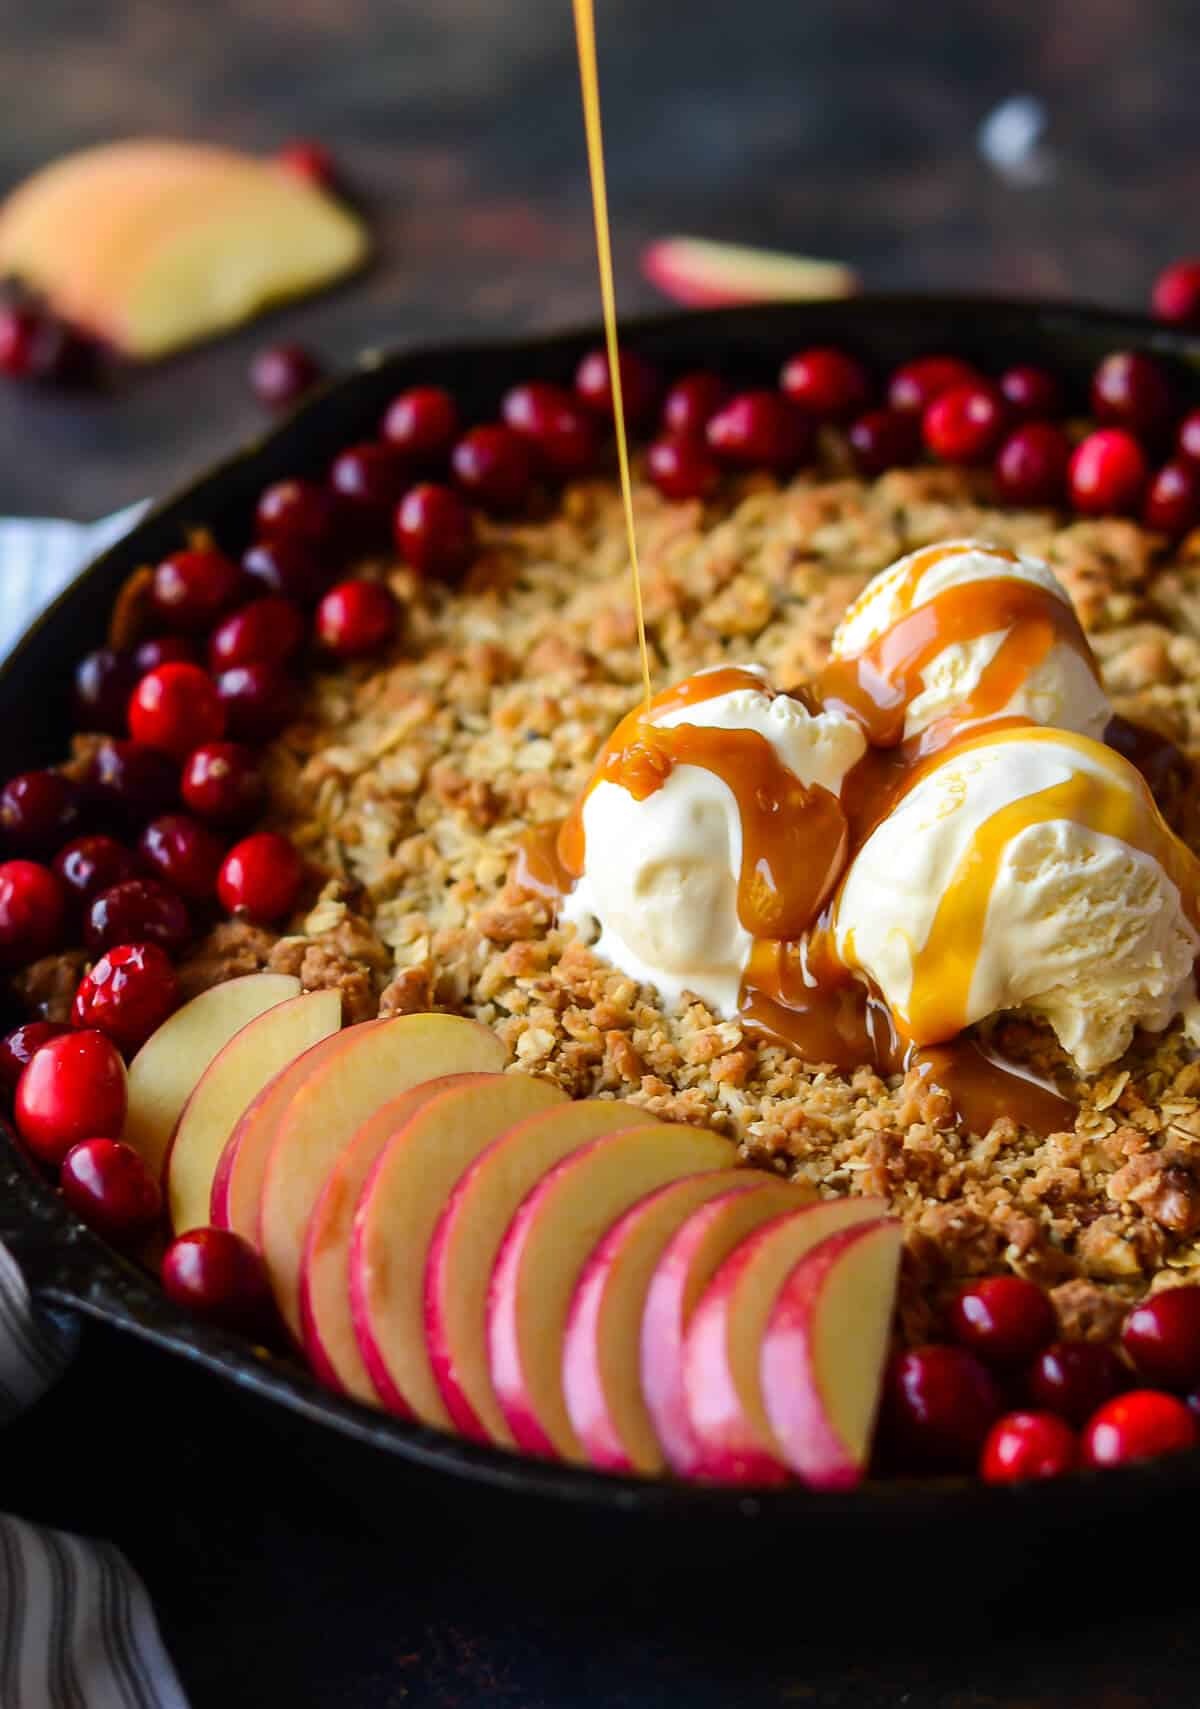 caramel sauce being drizzled over maple apple crisp topped with fresh cranberries, fresh apple slices and vanilla ice cream